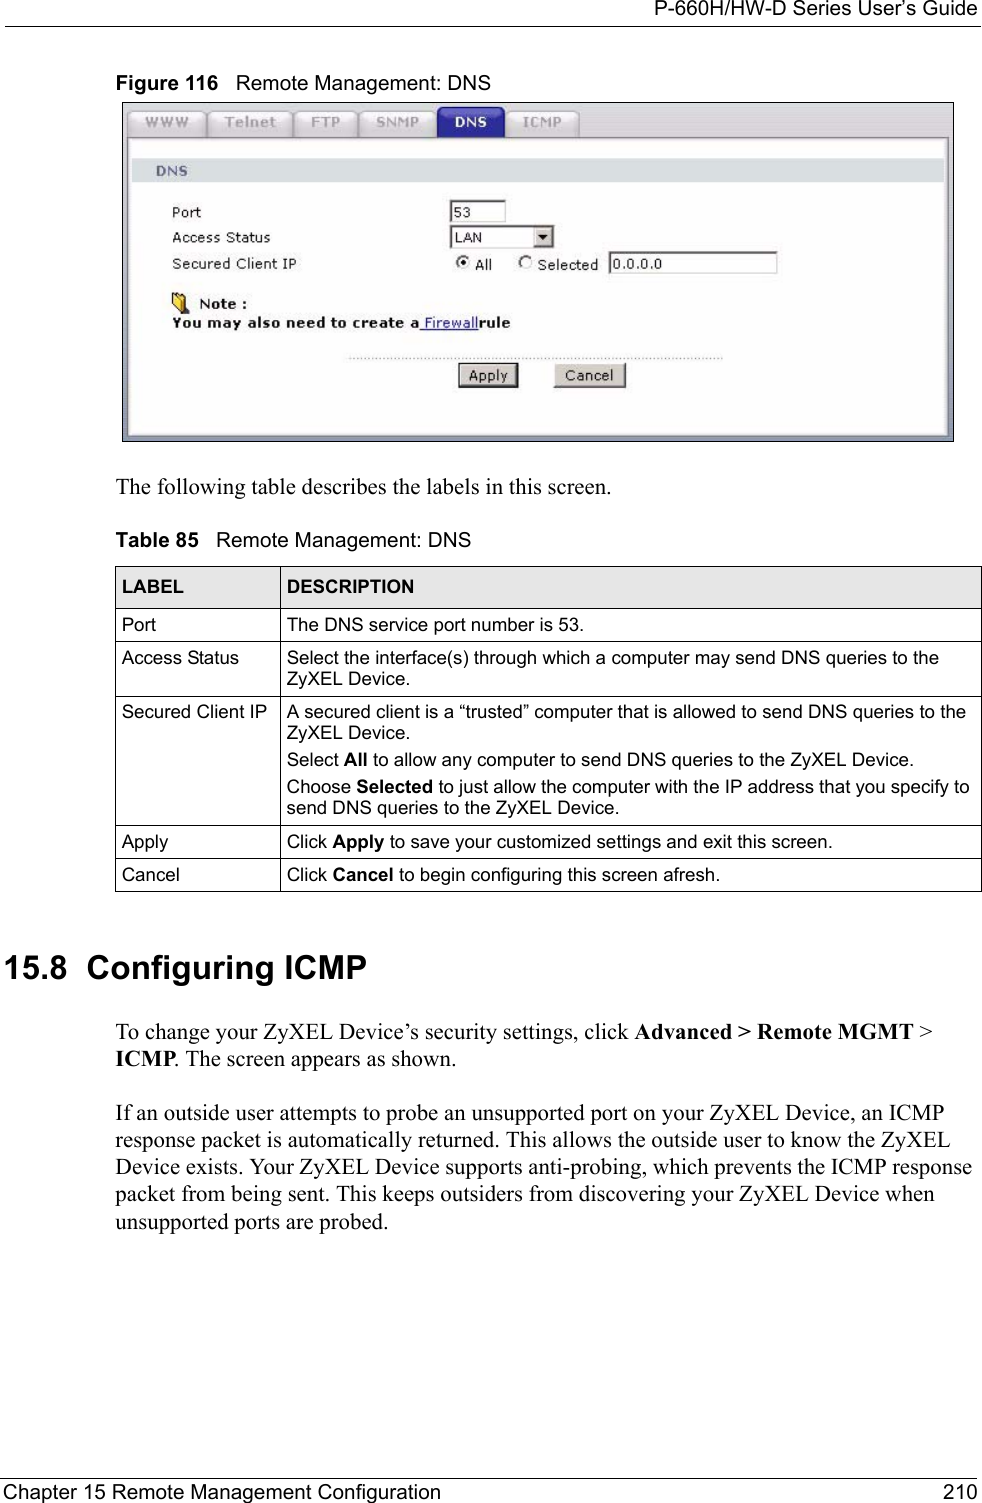 P-660H/HW-D Series User’s GuideChapter 15 Remote Management Configuration 210Figure 116   Remote Management: DNSThe following table describes the labels in this screen.15.8  Configuring ICMP To change your ZyXEL Device’s security settings, click Advanced &gt; Remote MGMT &gt; ICMP. The screen appears as shown.If an outside user attempts to probe an unsupported port on your ZyXEL Device, an ICMP response packet is automatically returned. This allows the outside user to know the ZyXEL Device exists. Your ZyXEL Device supports anti-probing, which prevents the ICMP response packet from being sent. This keeps outsiders from discovering your ZyXEL Device when unsupported ports are probed.  Table 85   Remote Management: DNSLABEL DESCRIPTIONPort The DNS service port number is 53.Access Status Select the interface(s) through which a computer may send DNS queries to the ZyXEL Device.Secured Client IP A secured client is a “trusted” computer that is allowed to send DNS queries to the ZyXEL Device.Select All to allow any computer to send DNS queries to the ZyXEL Device.Choose Selected to just allow the computer with the IP address that you specify to send DNS queries to the ZyXEL Device.Apply Click Apply to save your customized settings and exit this screen. Cancel Click Cancel to begin configuring this screen afresh.